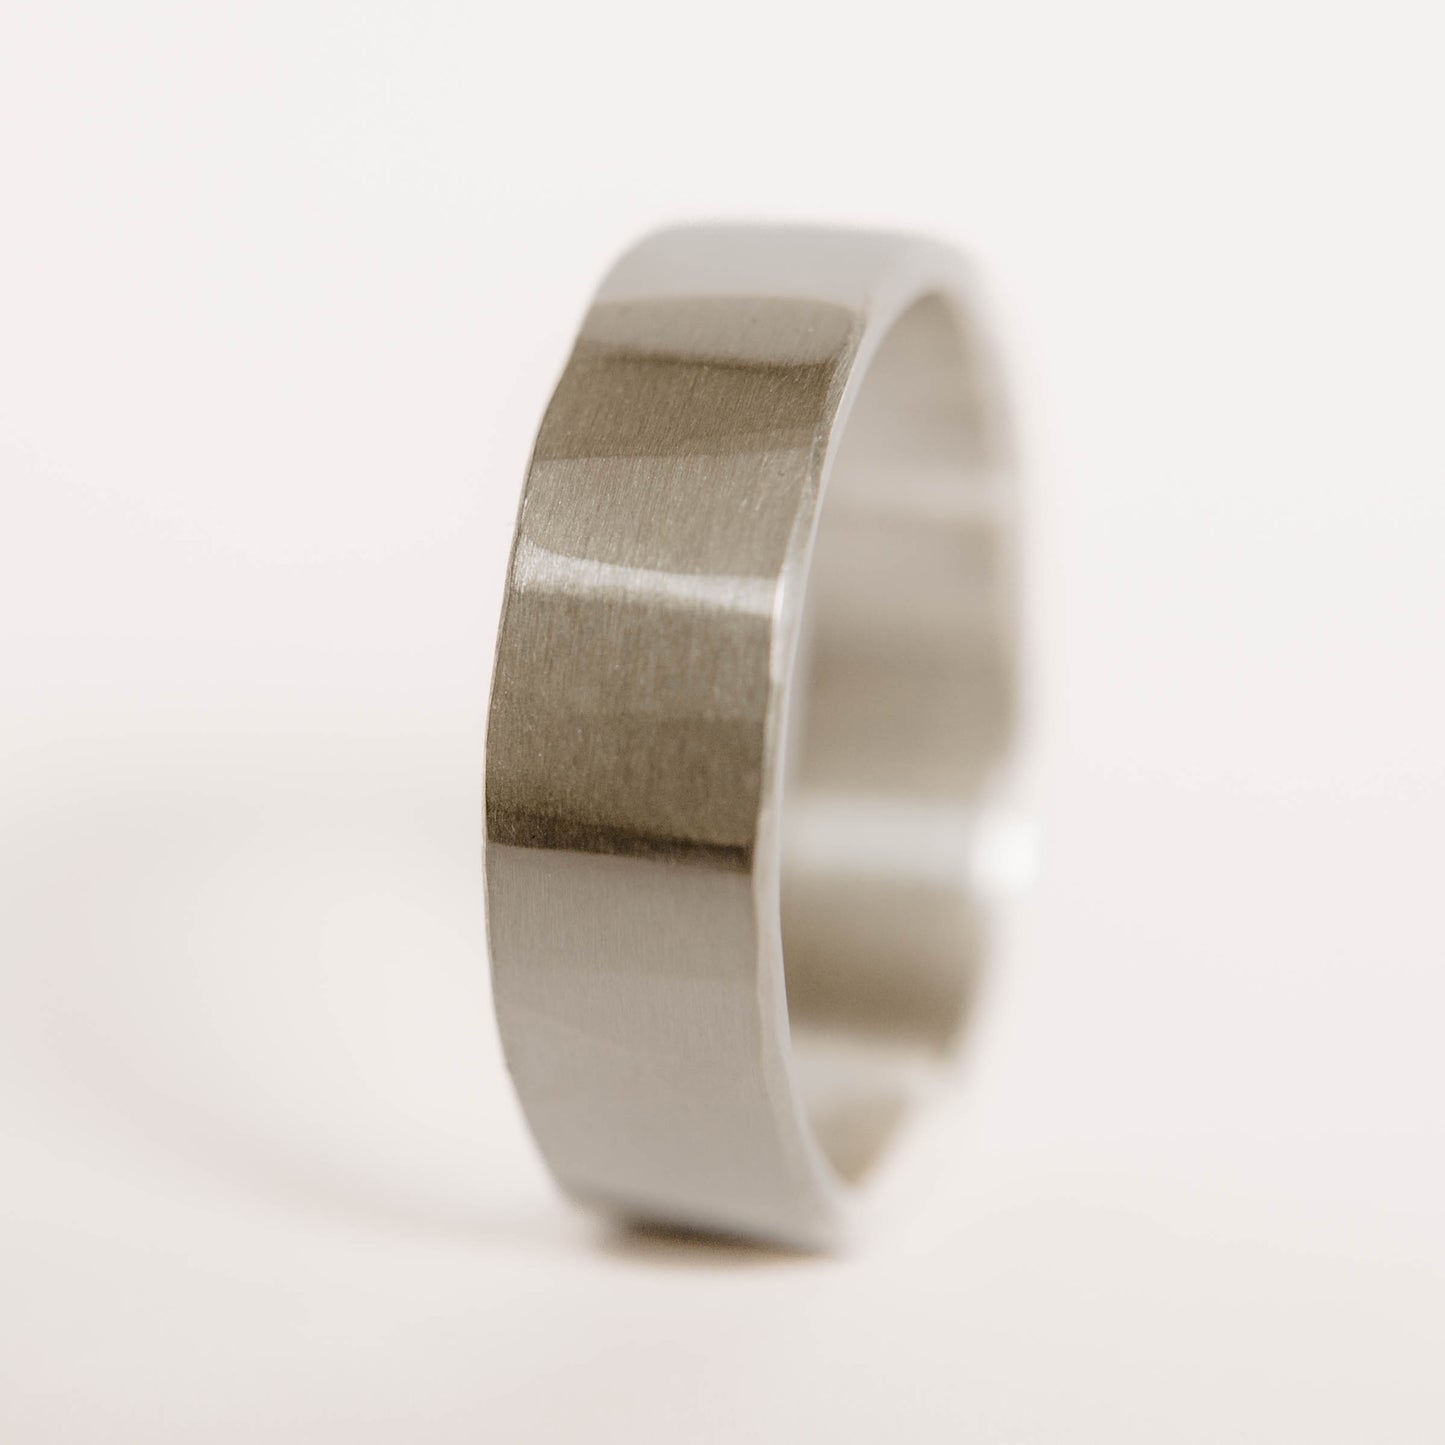 Mens sterling silver wedding band. This photo shows a lightly faceted silver ring (Vertical with white backdrop)